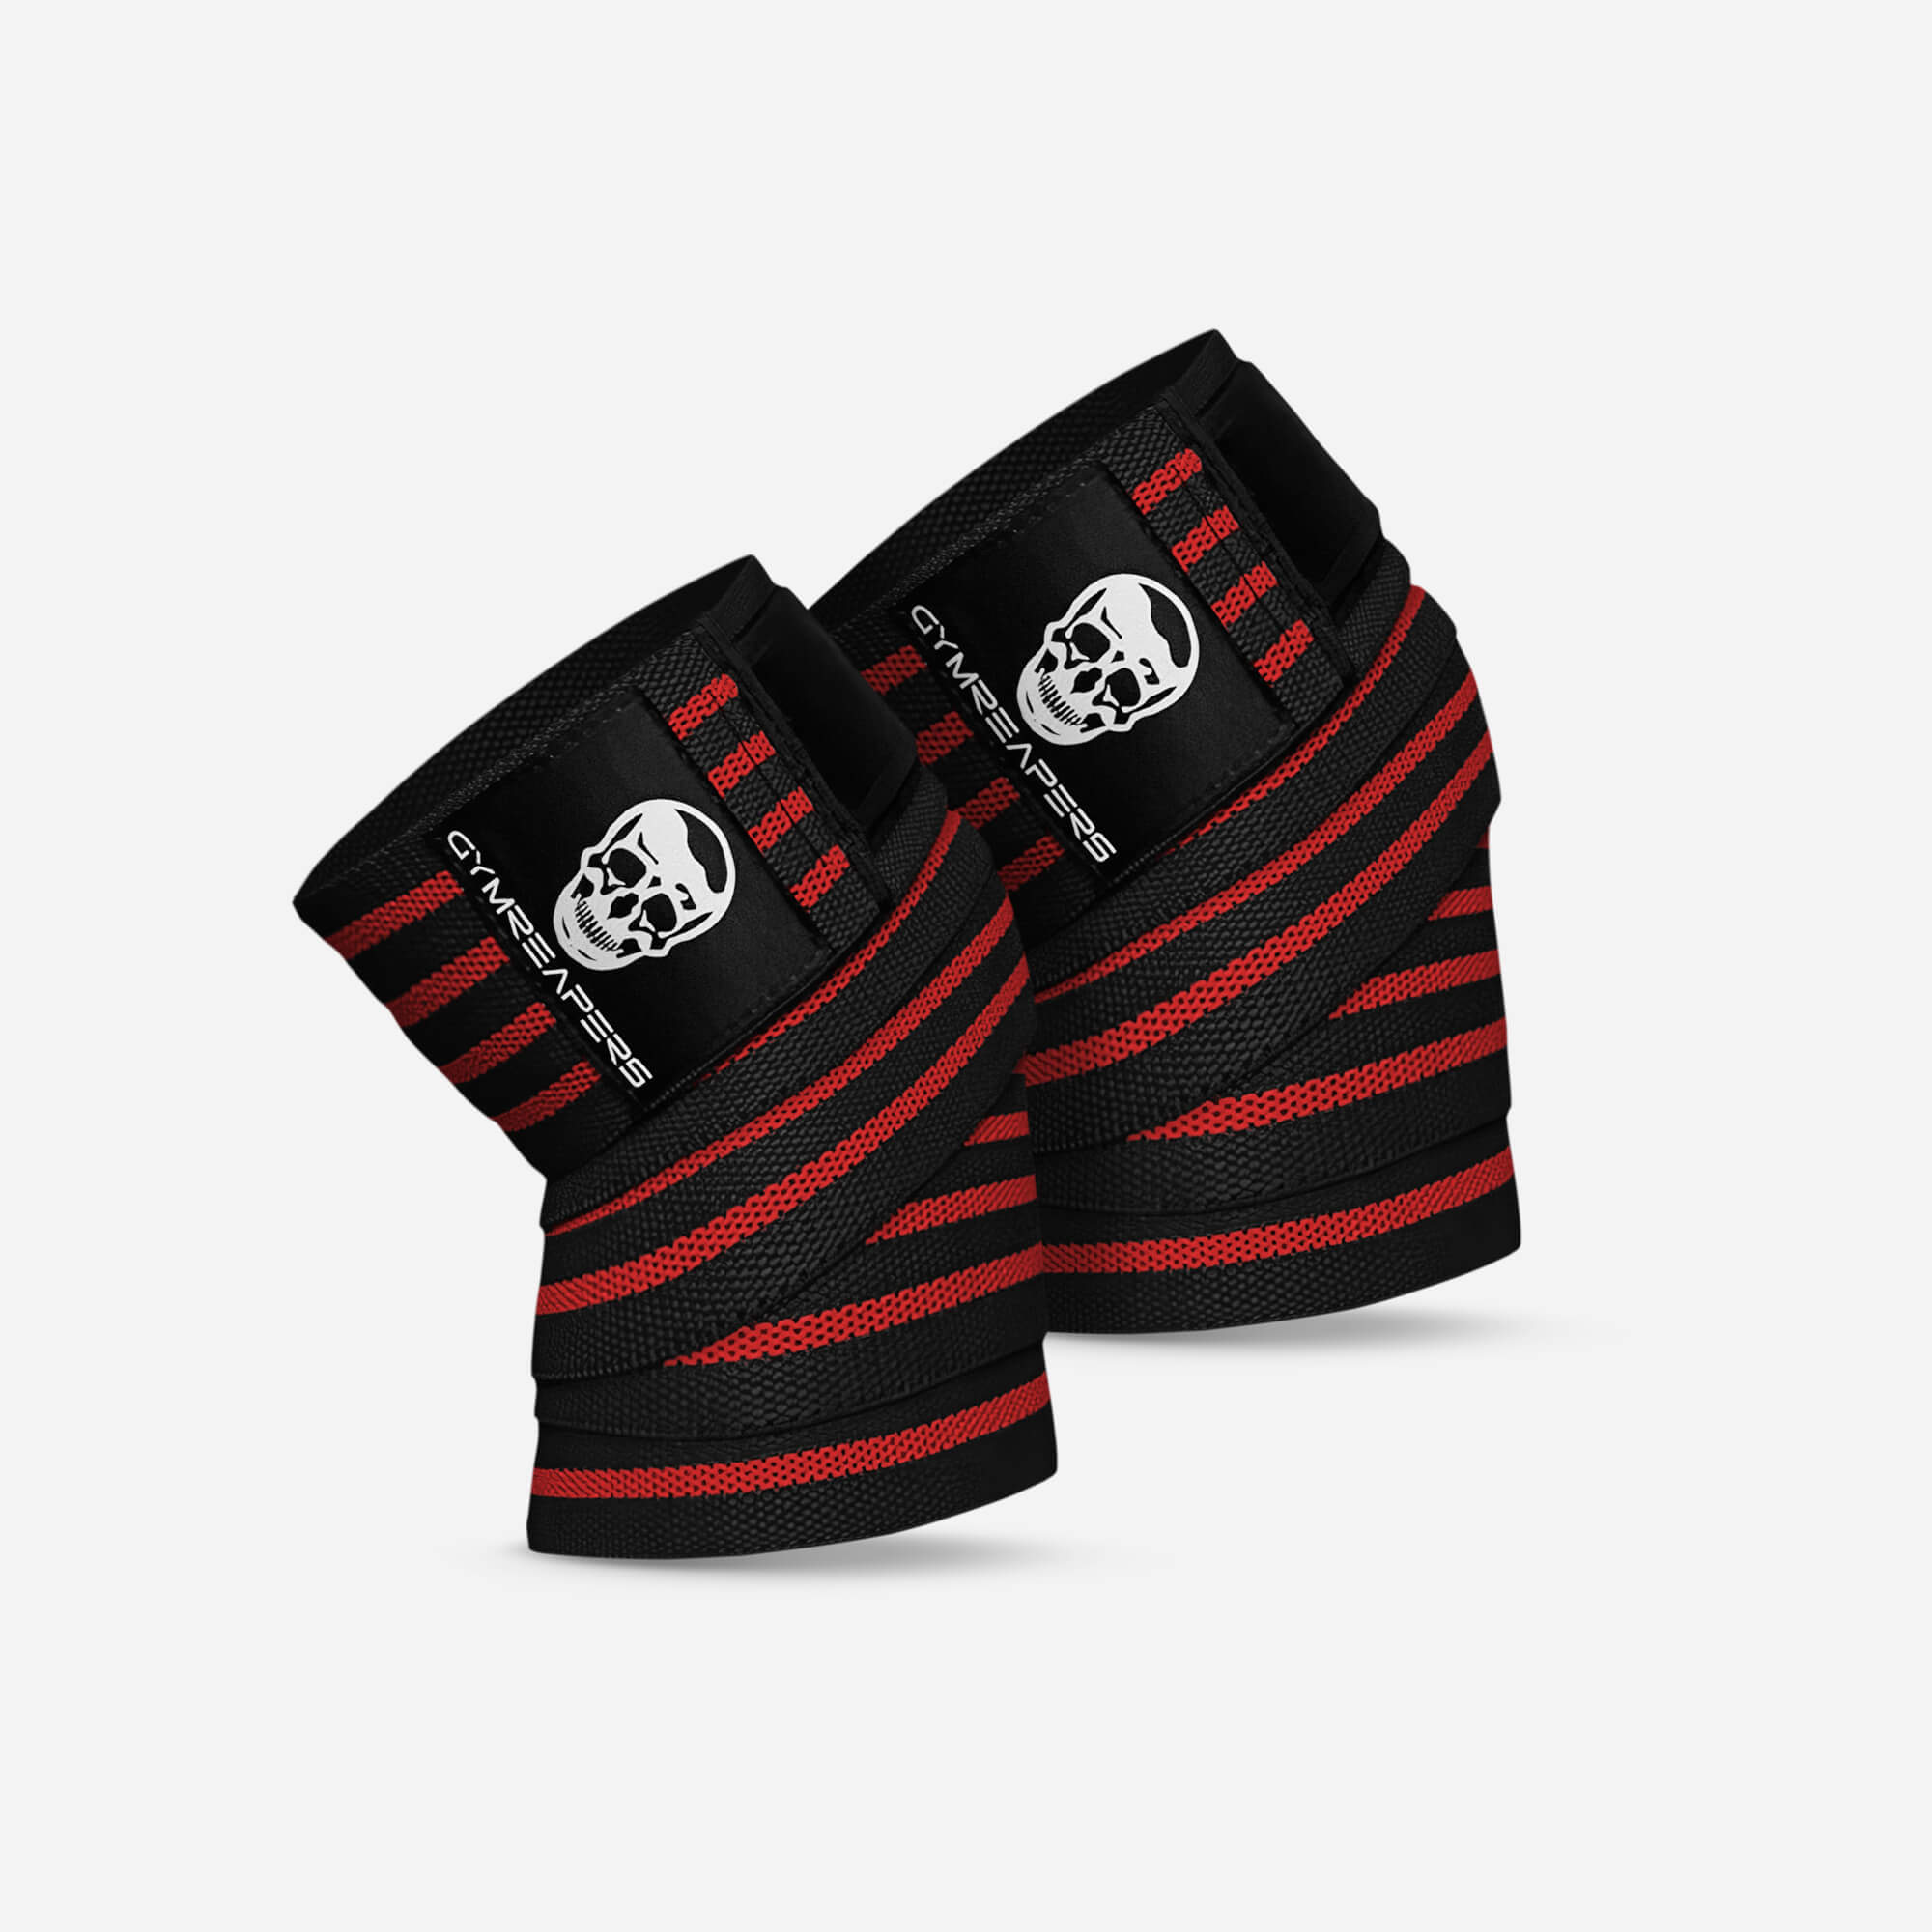 Gymreapers Knee Wraps (Pair) with Strap for Squats, Weightlifting, Powerlifting, Leg Press, and Cross Training - Flexible 180cm Knee Wraps for Squatti